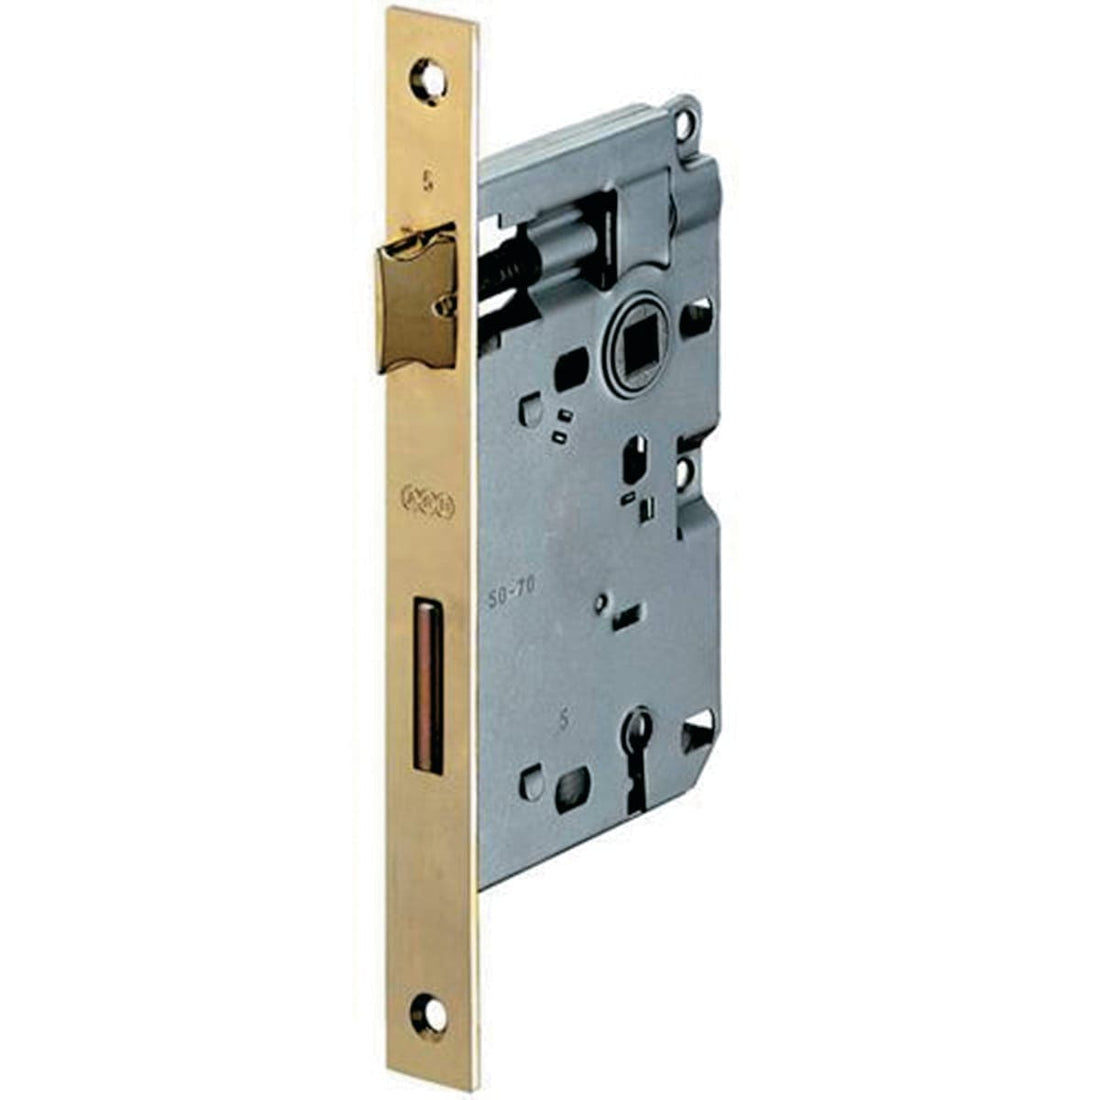 PATENT LOCK CENTRE DISTANCE 70 MM ENTRY 50 MM SQUARE EDGE PAINTED BRASS - best price from Maltashopper.com BR410005144